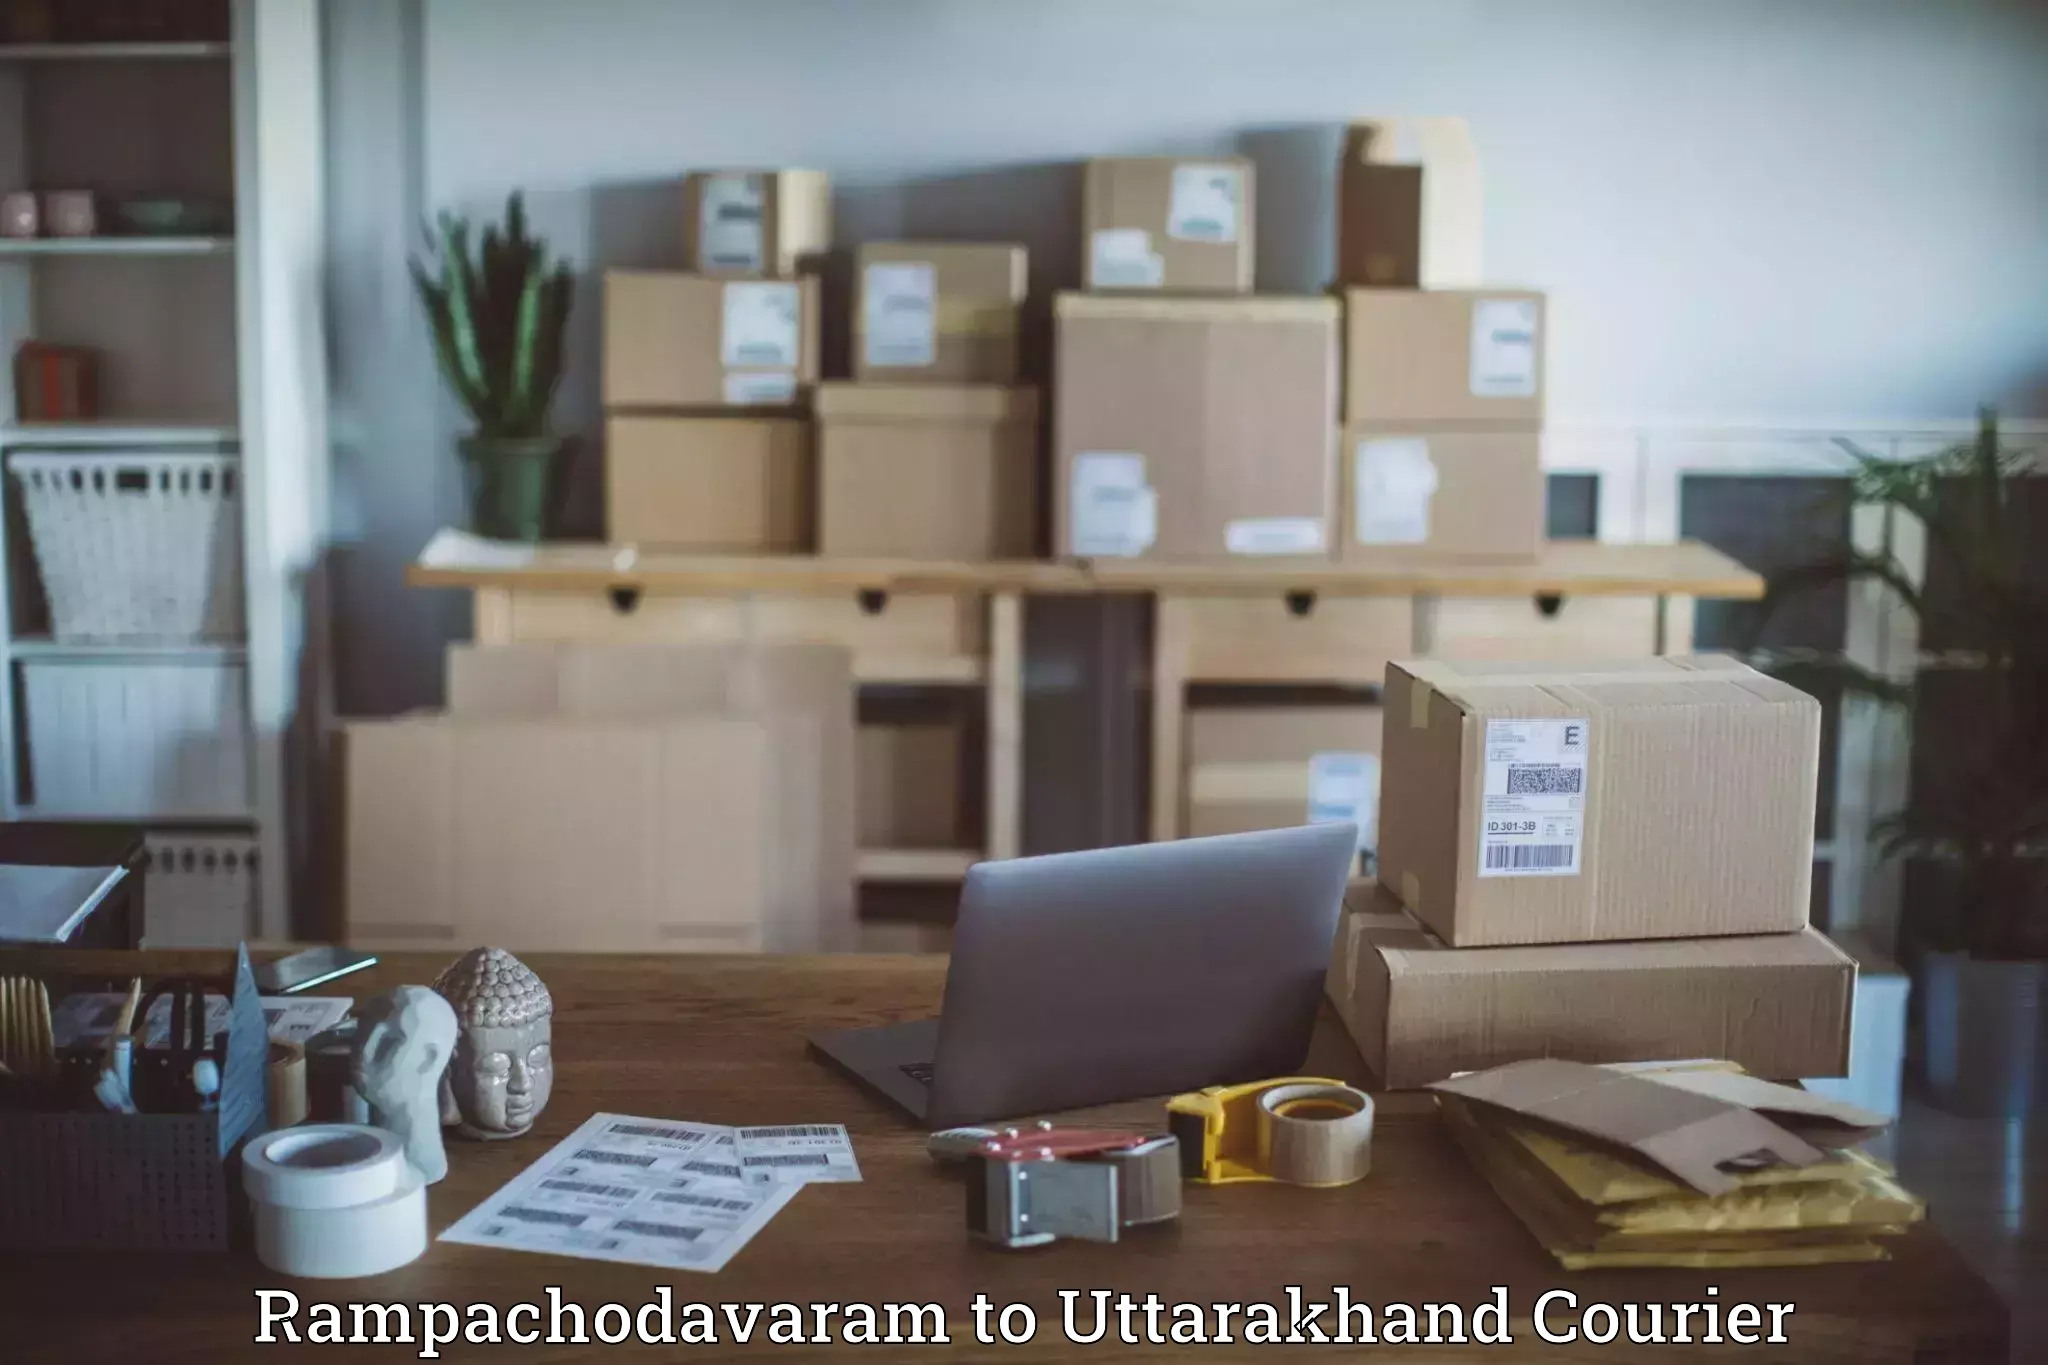 Business delivery service Rampachodavaram to IIT Roorkee